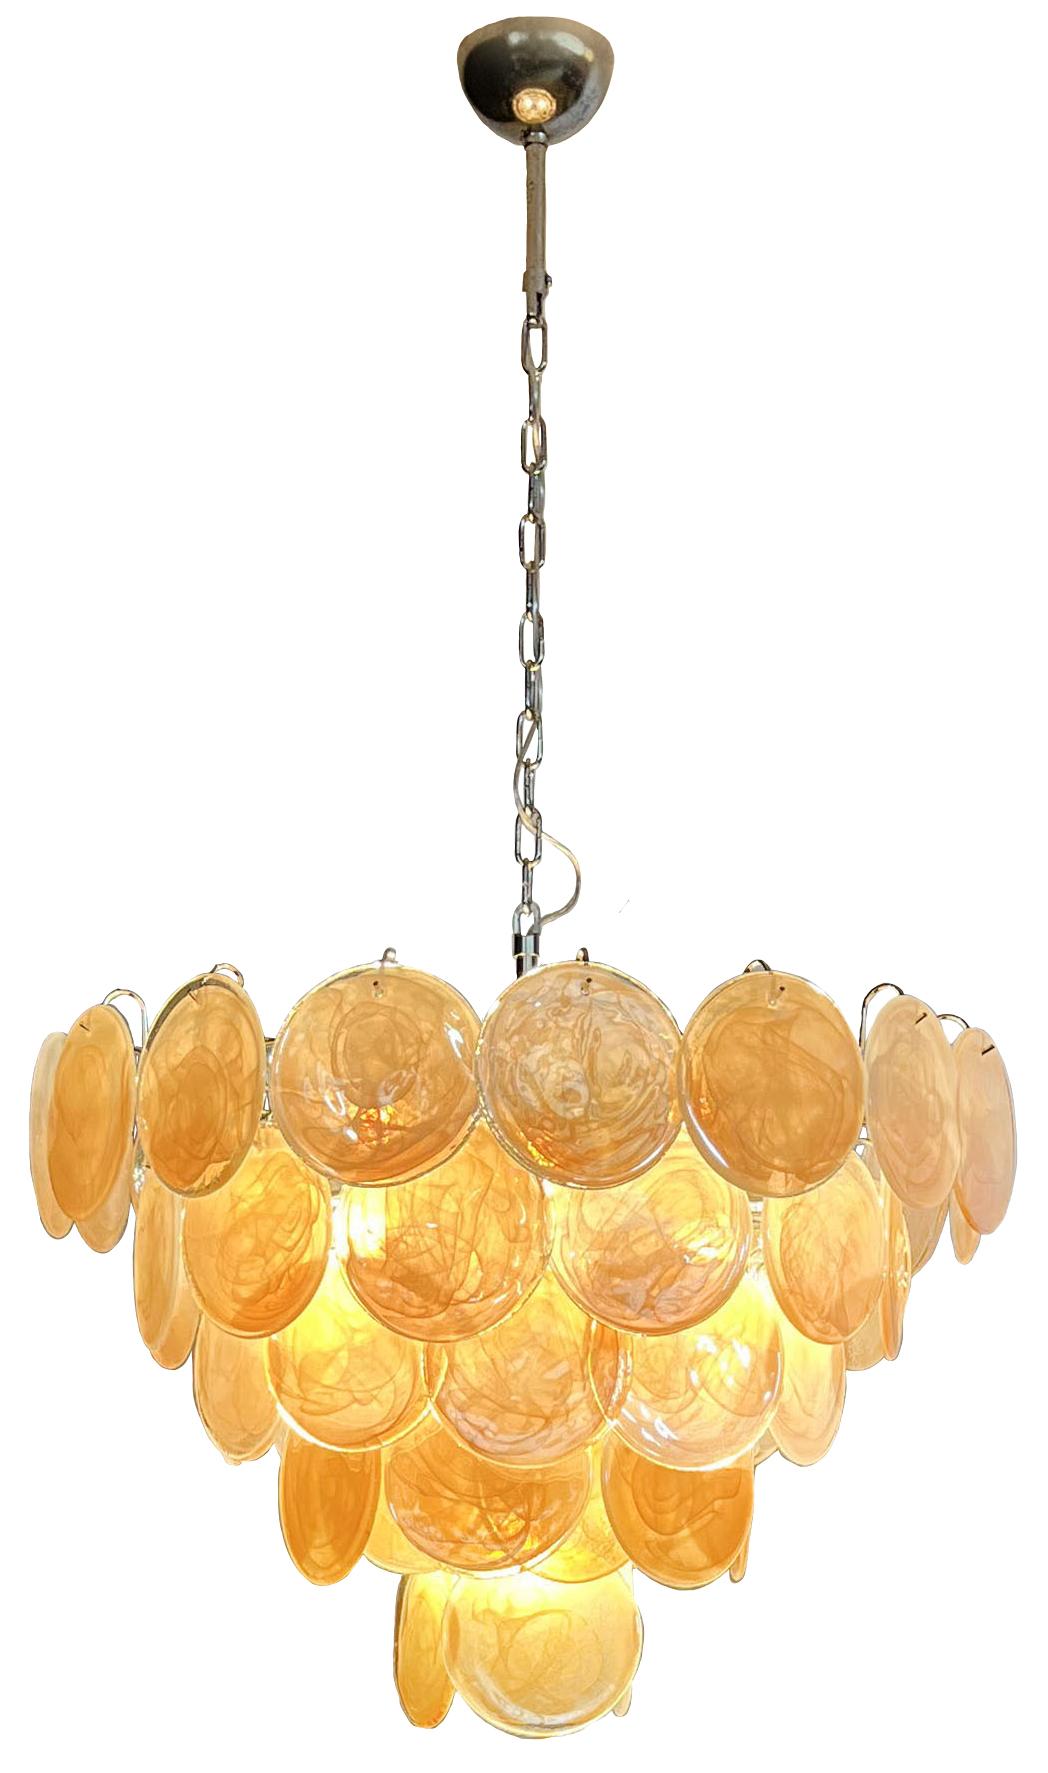 Italian Murano chandelier. The chandelier has 57 Murano ridescent alabaster honey discs in a nickel metal frame.. The glasses are now unavailable, they have the particularity of reflecting a multiplicity of colors, which makes the chandelier a true